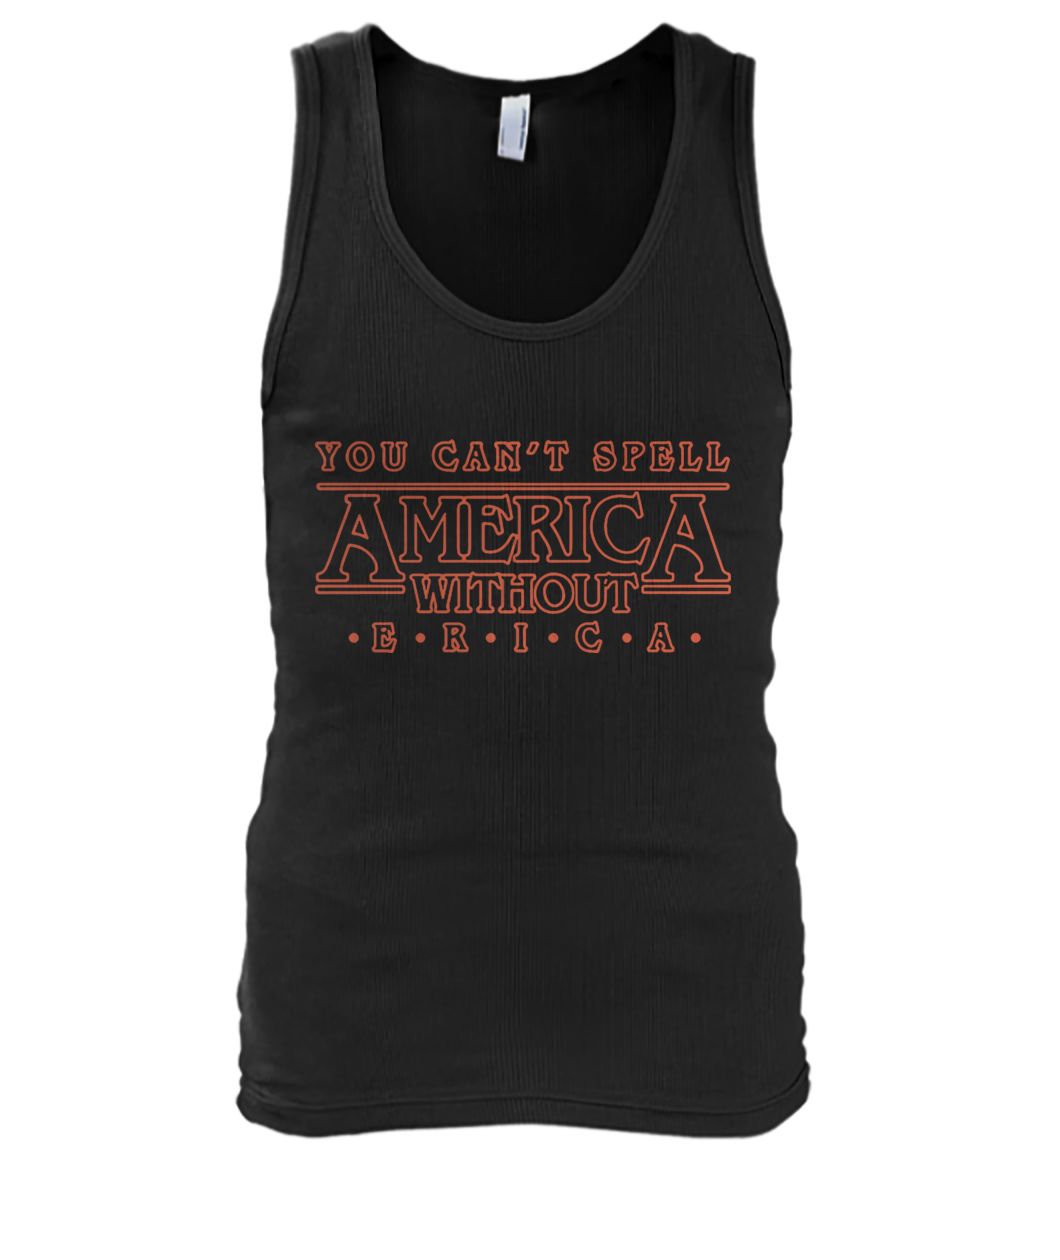 You can't spell america without erica men's tank top